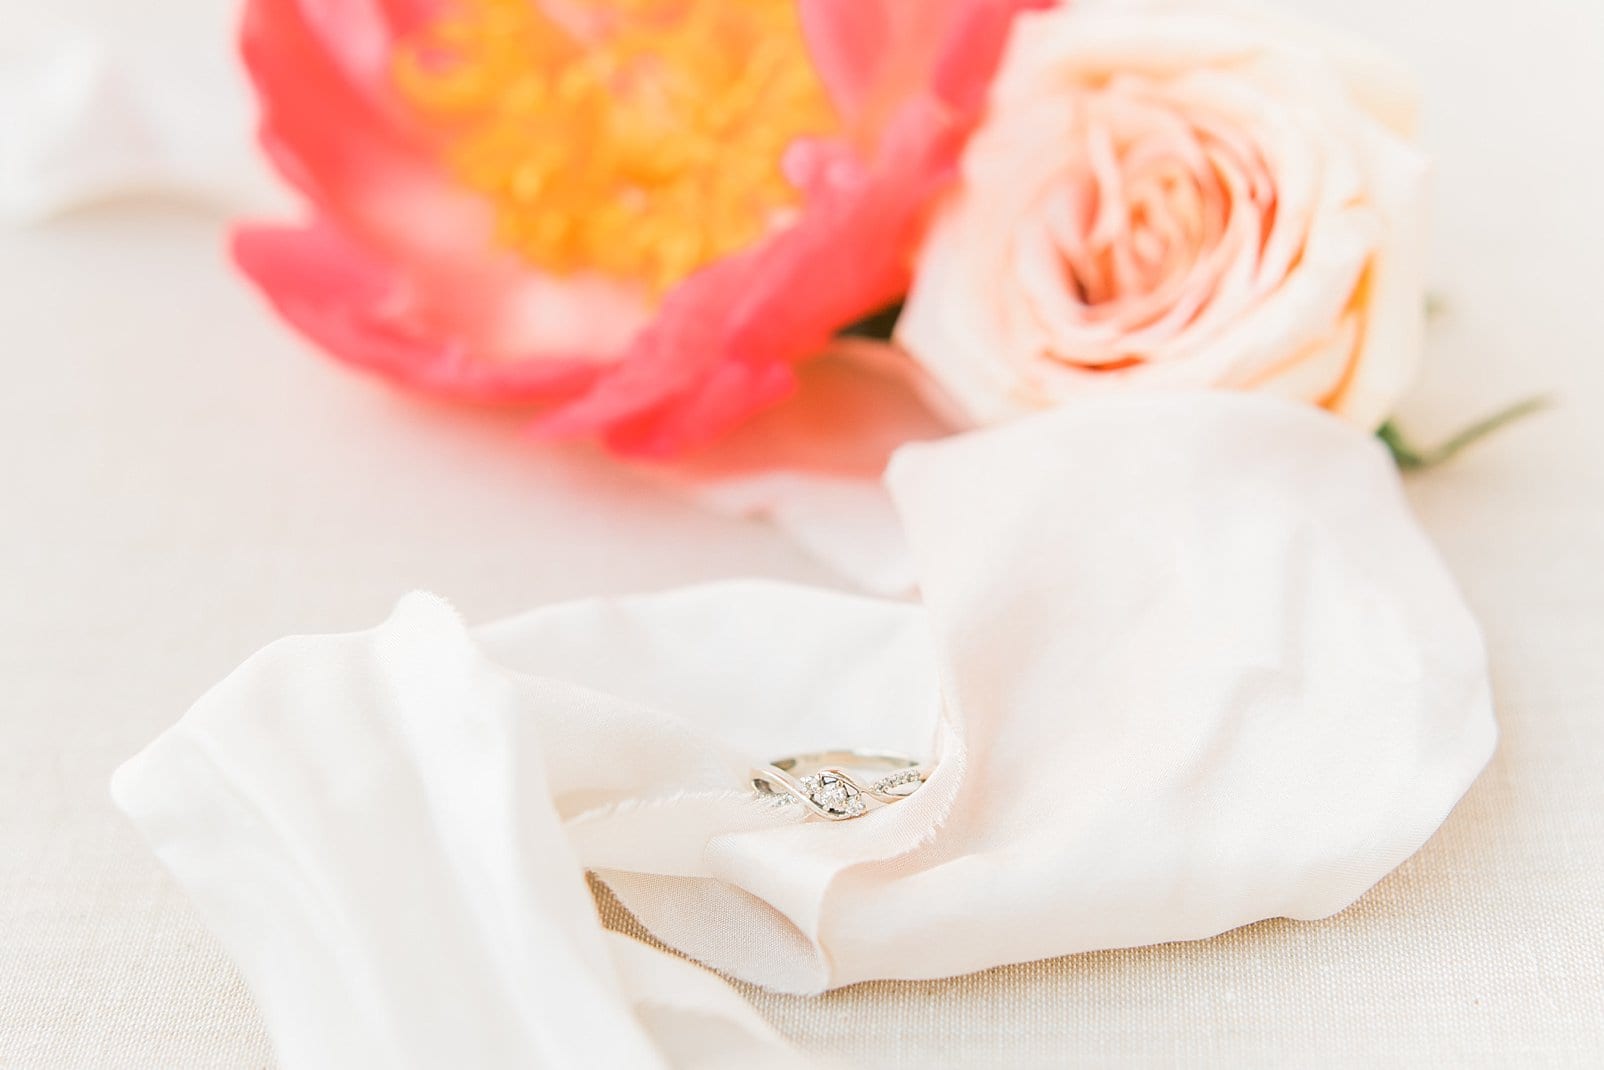 chapel hill, nc engagement ring with peach flowers photo